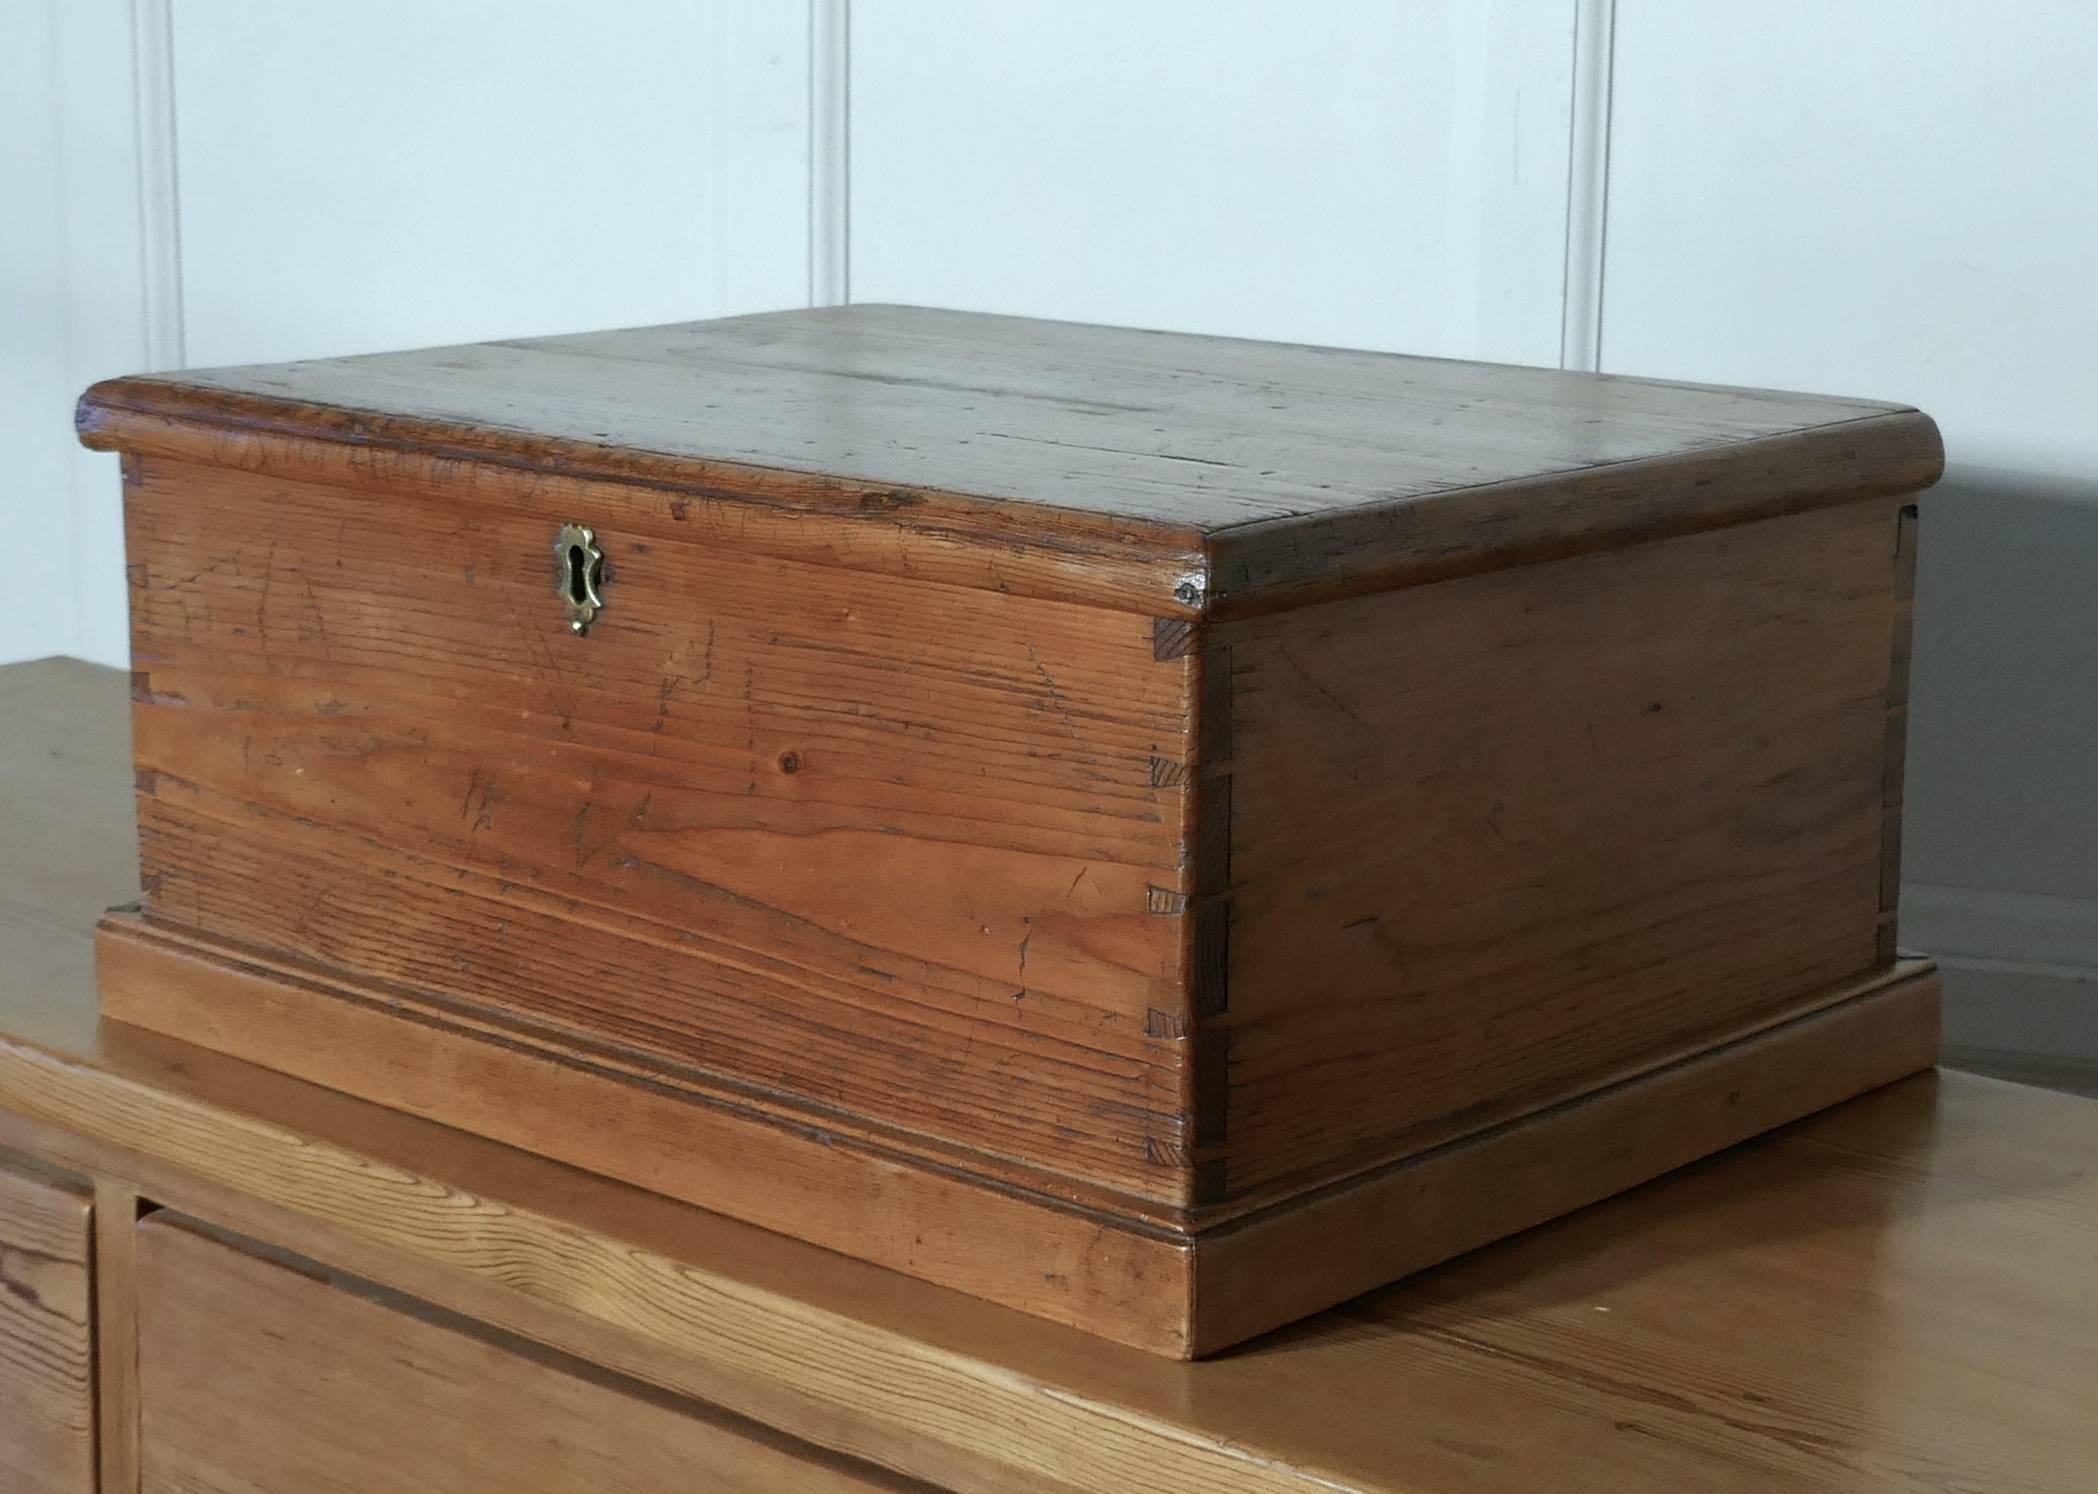 Small pine tabletop deed box 

This good quality little box, it is in its original condition it has never been painted just waxed to give it an aged and well used look
The box has a rounded moulded top edge and is of very solid construction, it